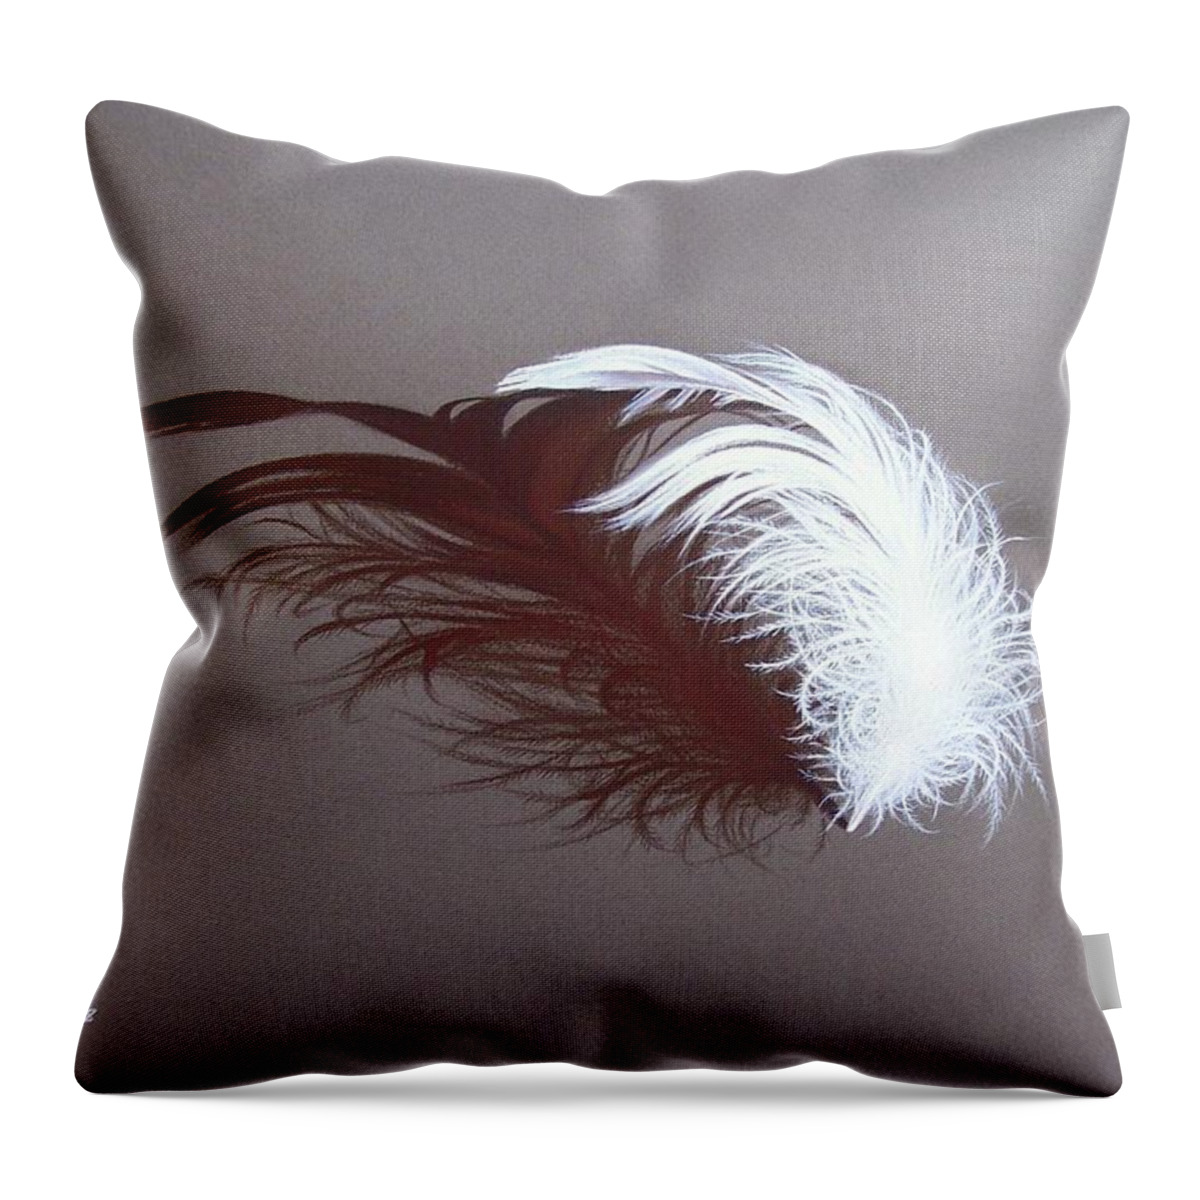 Still-life Throw Pillow featuring the drawing Passion by Elena Kolotusha